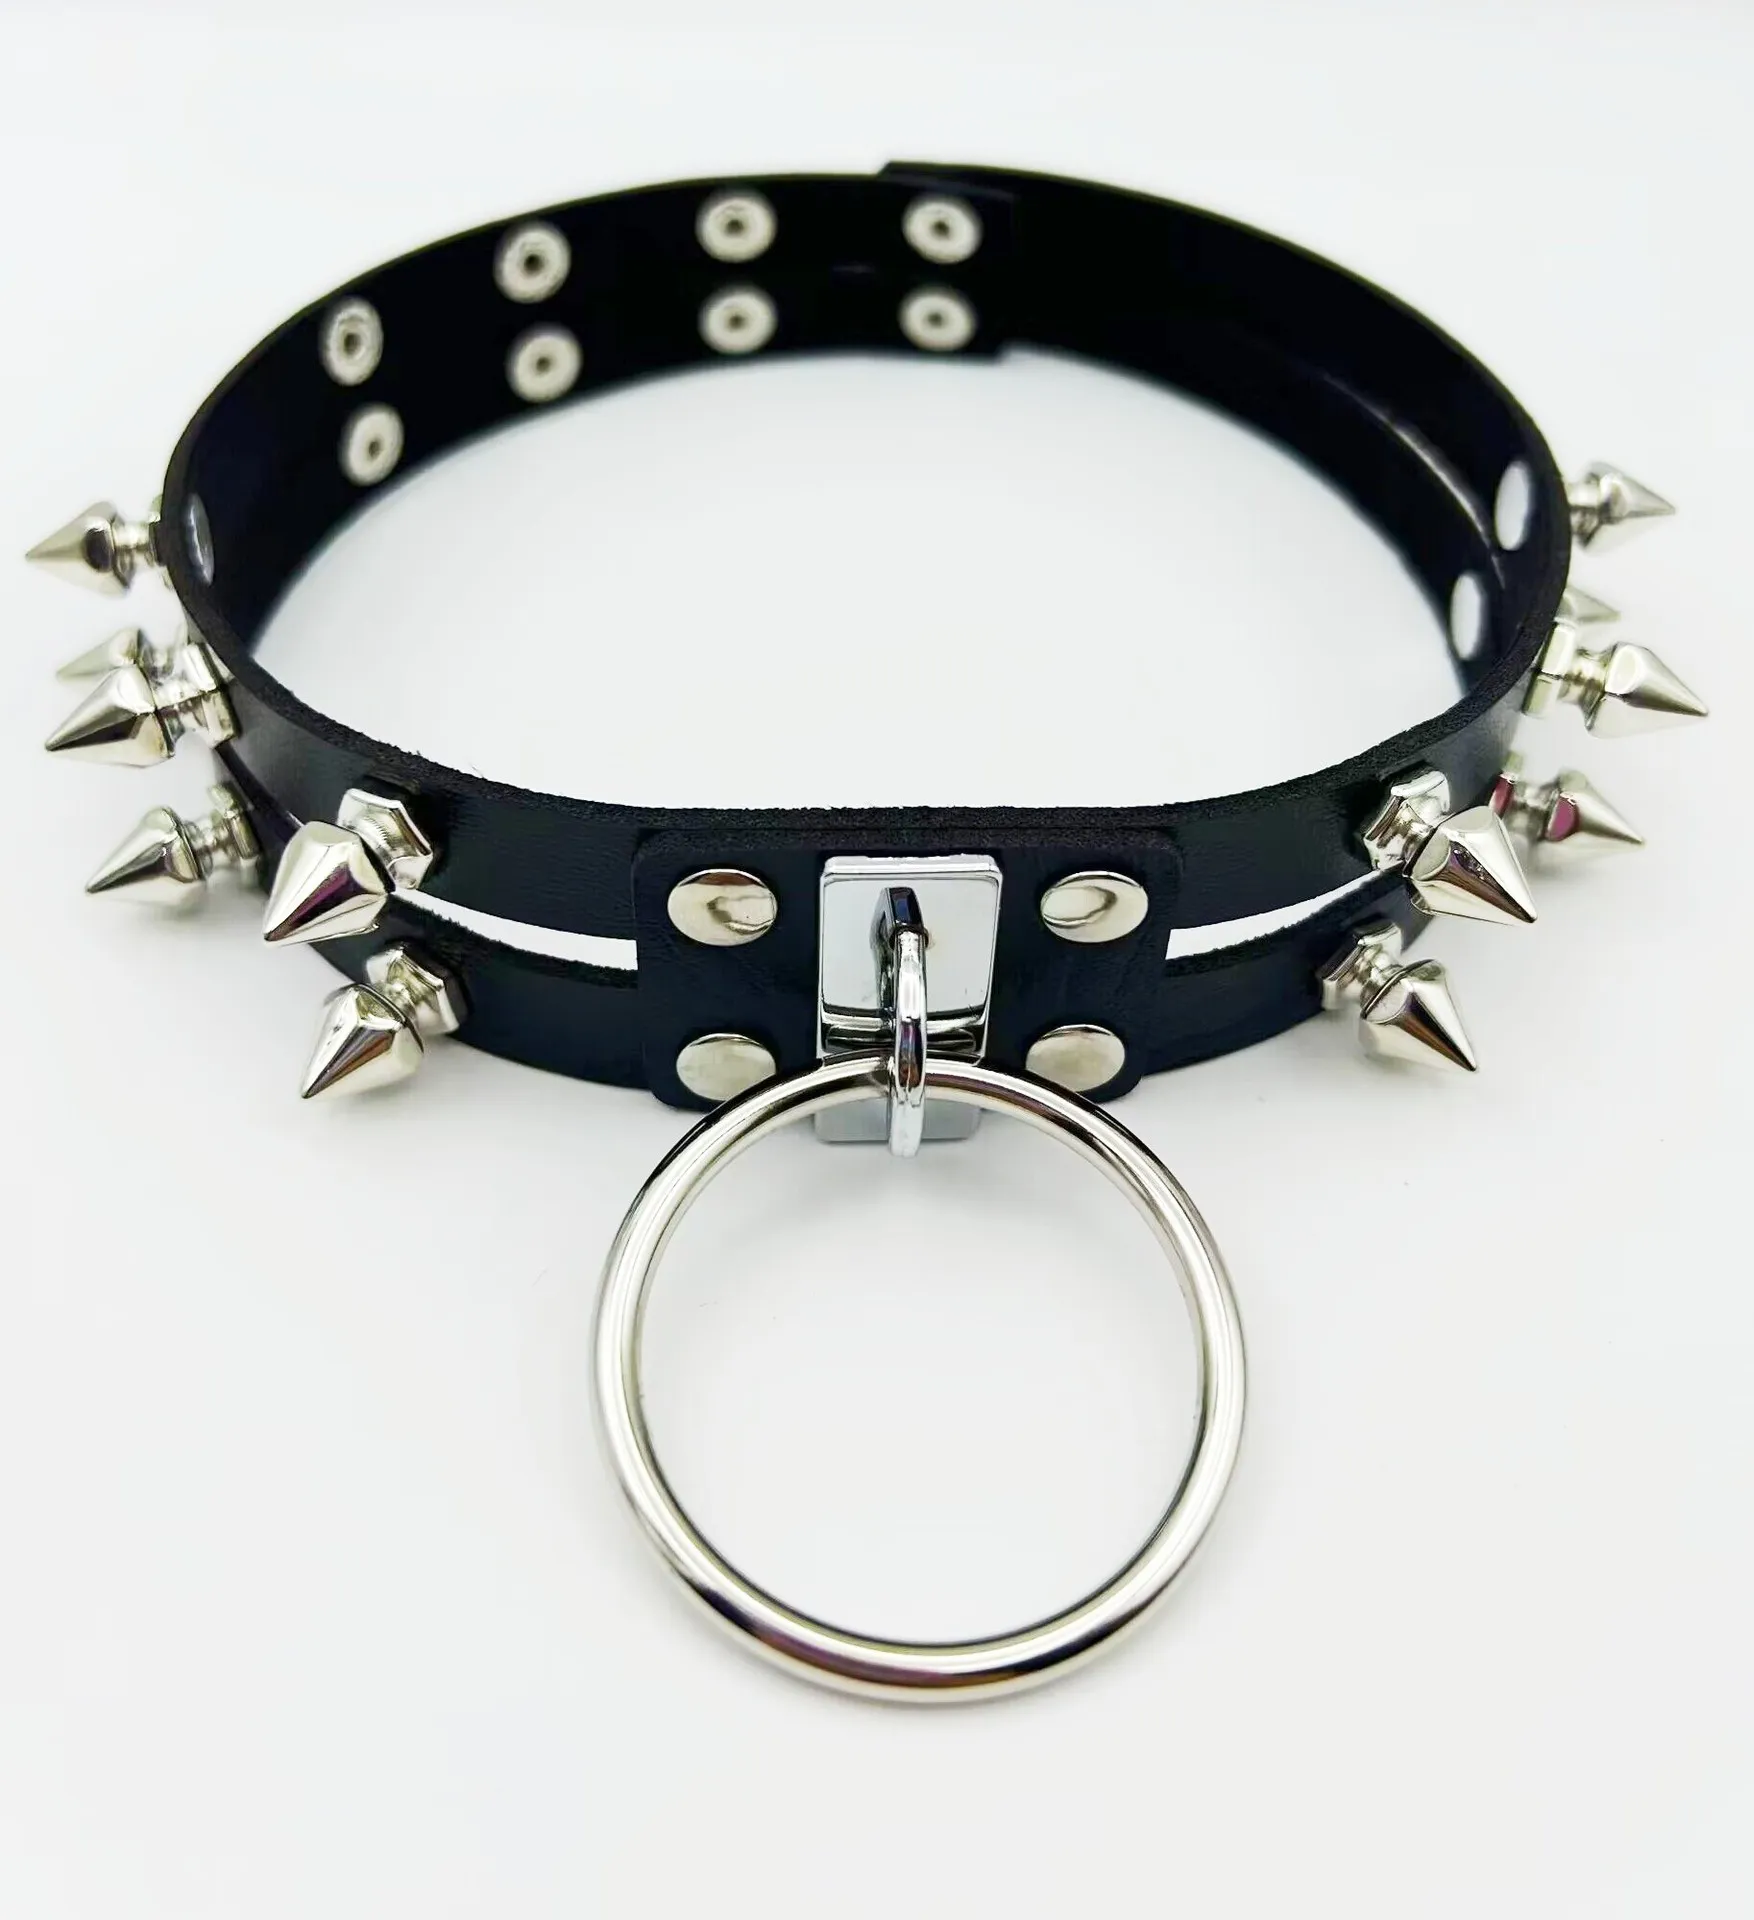 Chokers Gothic Black Spiked Punk Choker Collar Spikes Rivets Studded Chocker Necklace For Women Men Bondage Cosplay Goth Je Dhgarden Dhhcf